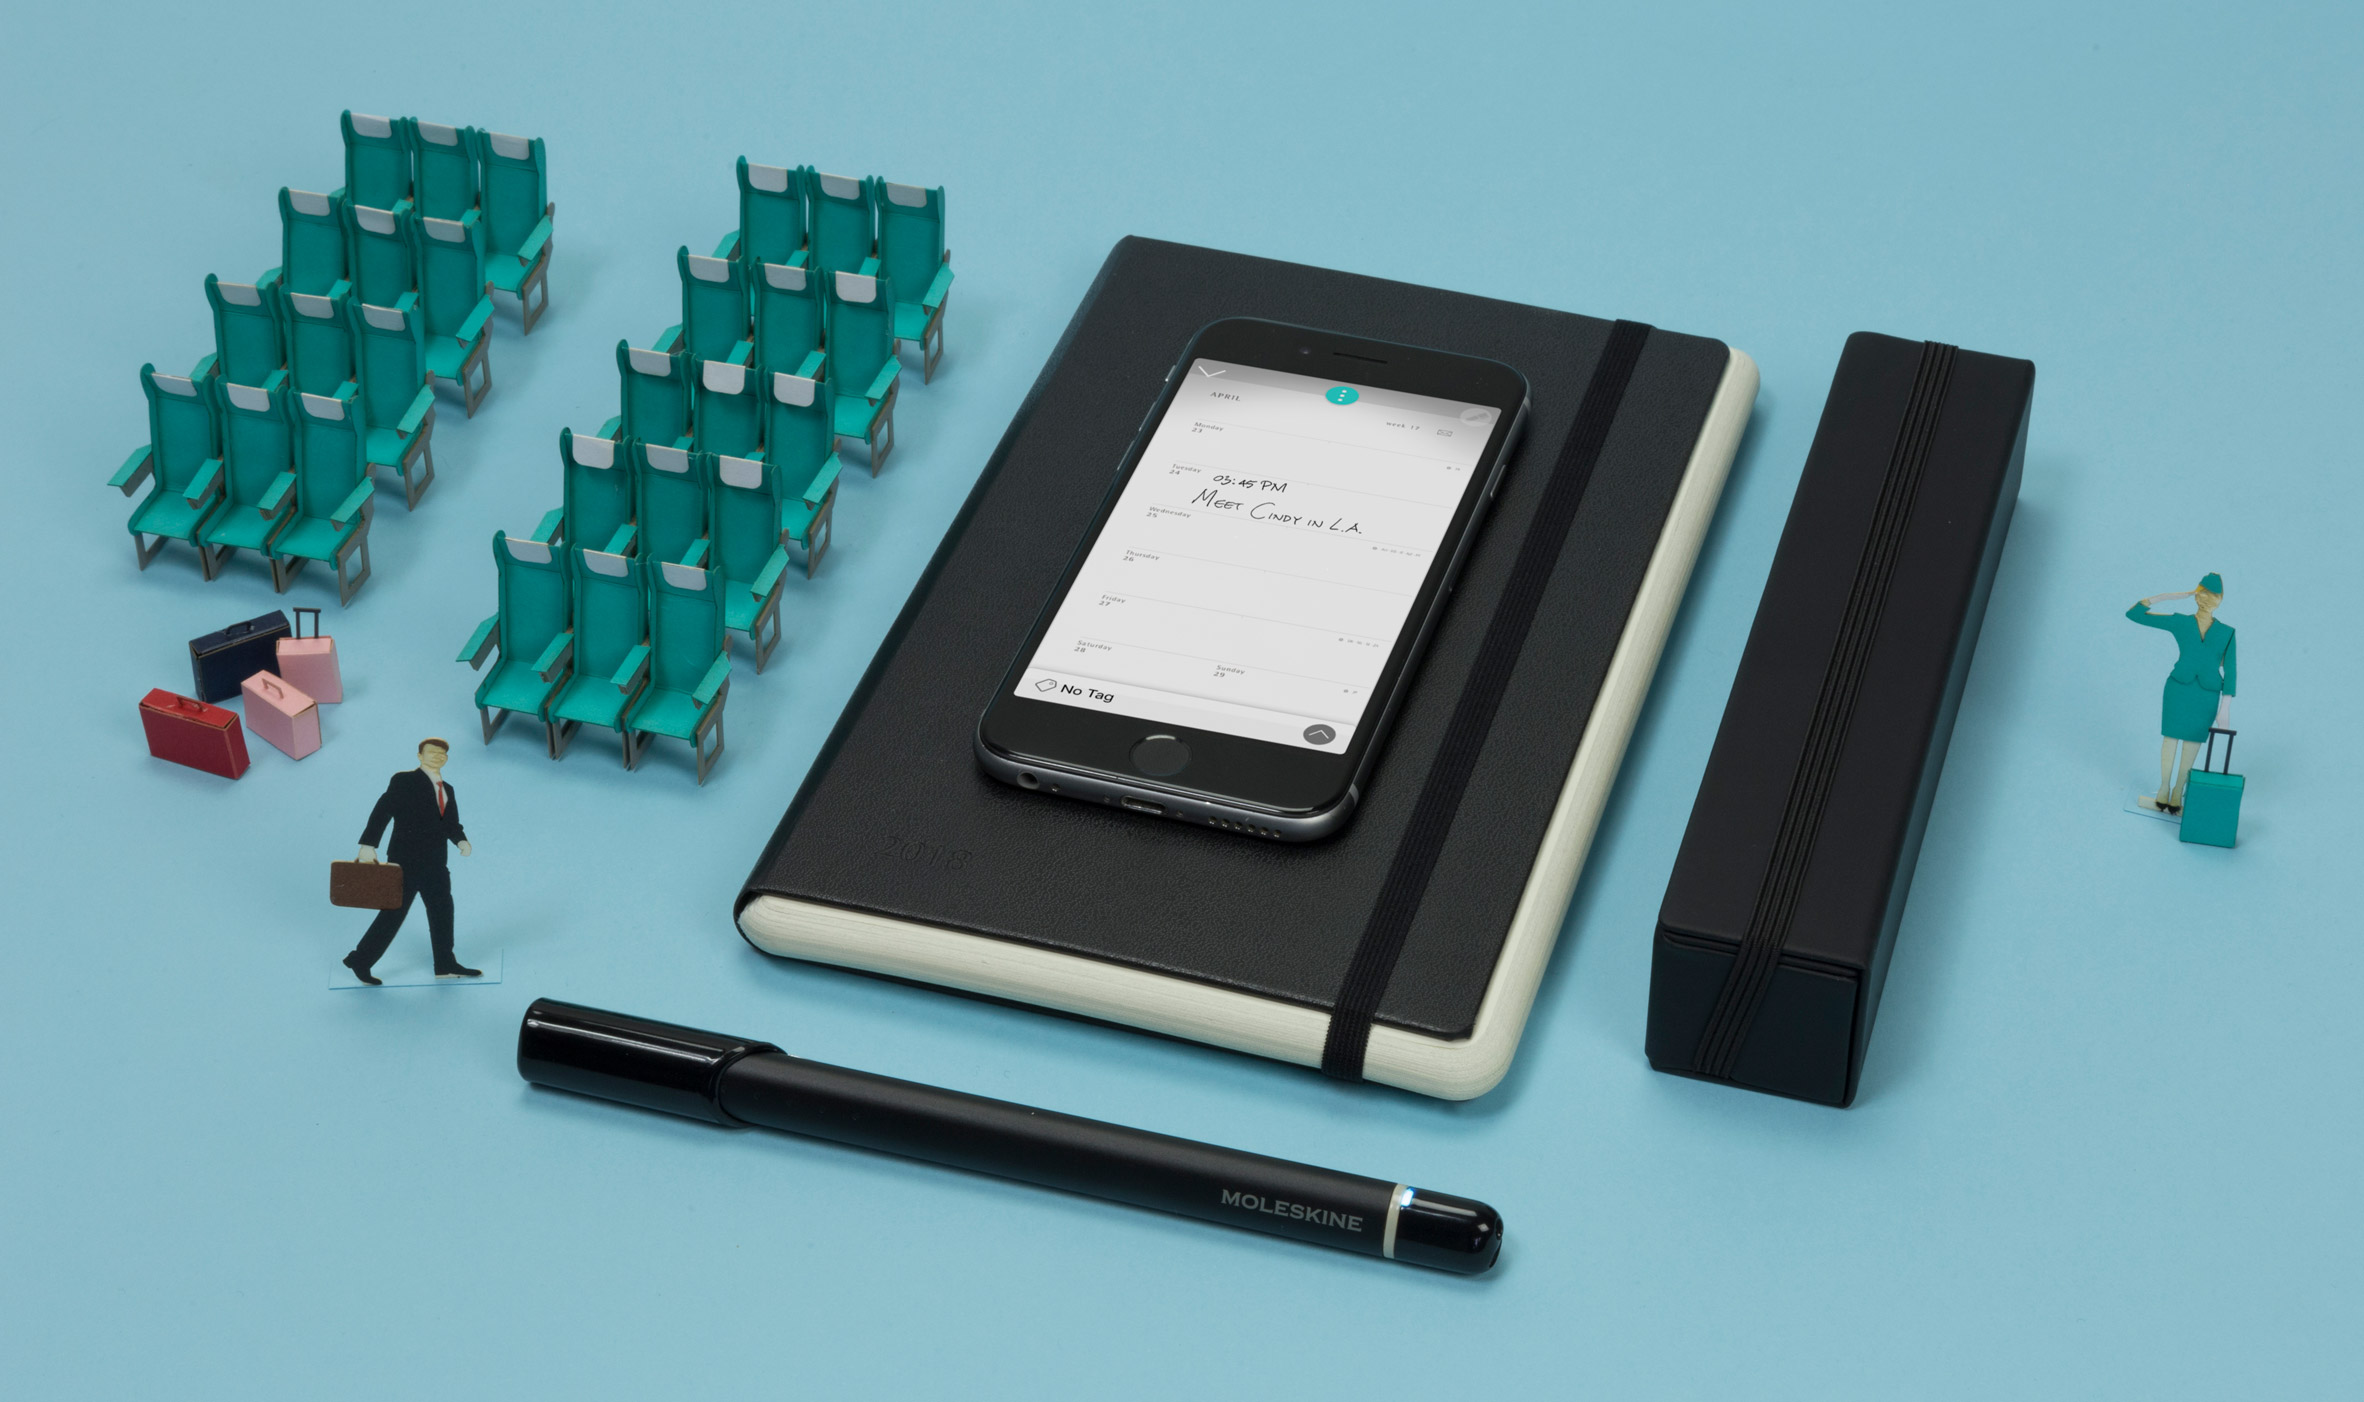 Moleskine's Smart Planner lets users organise notes on page and screen